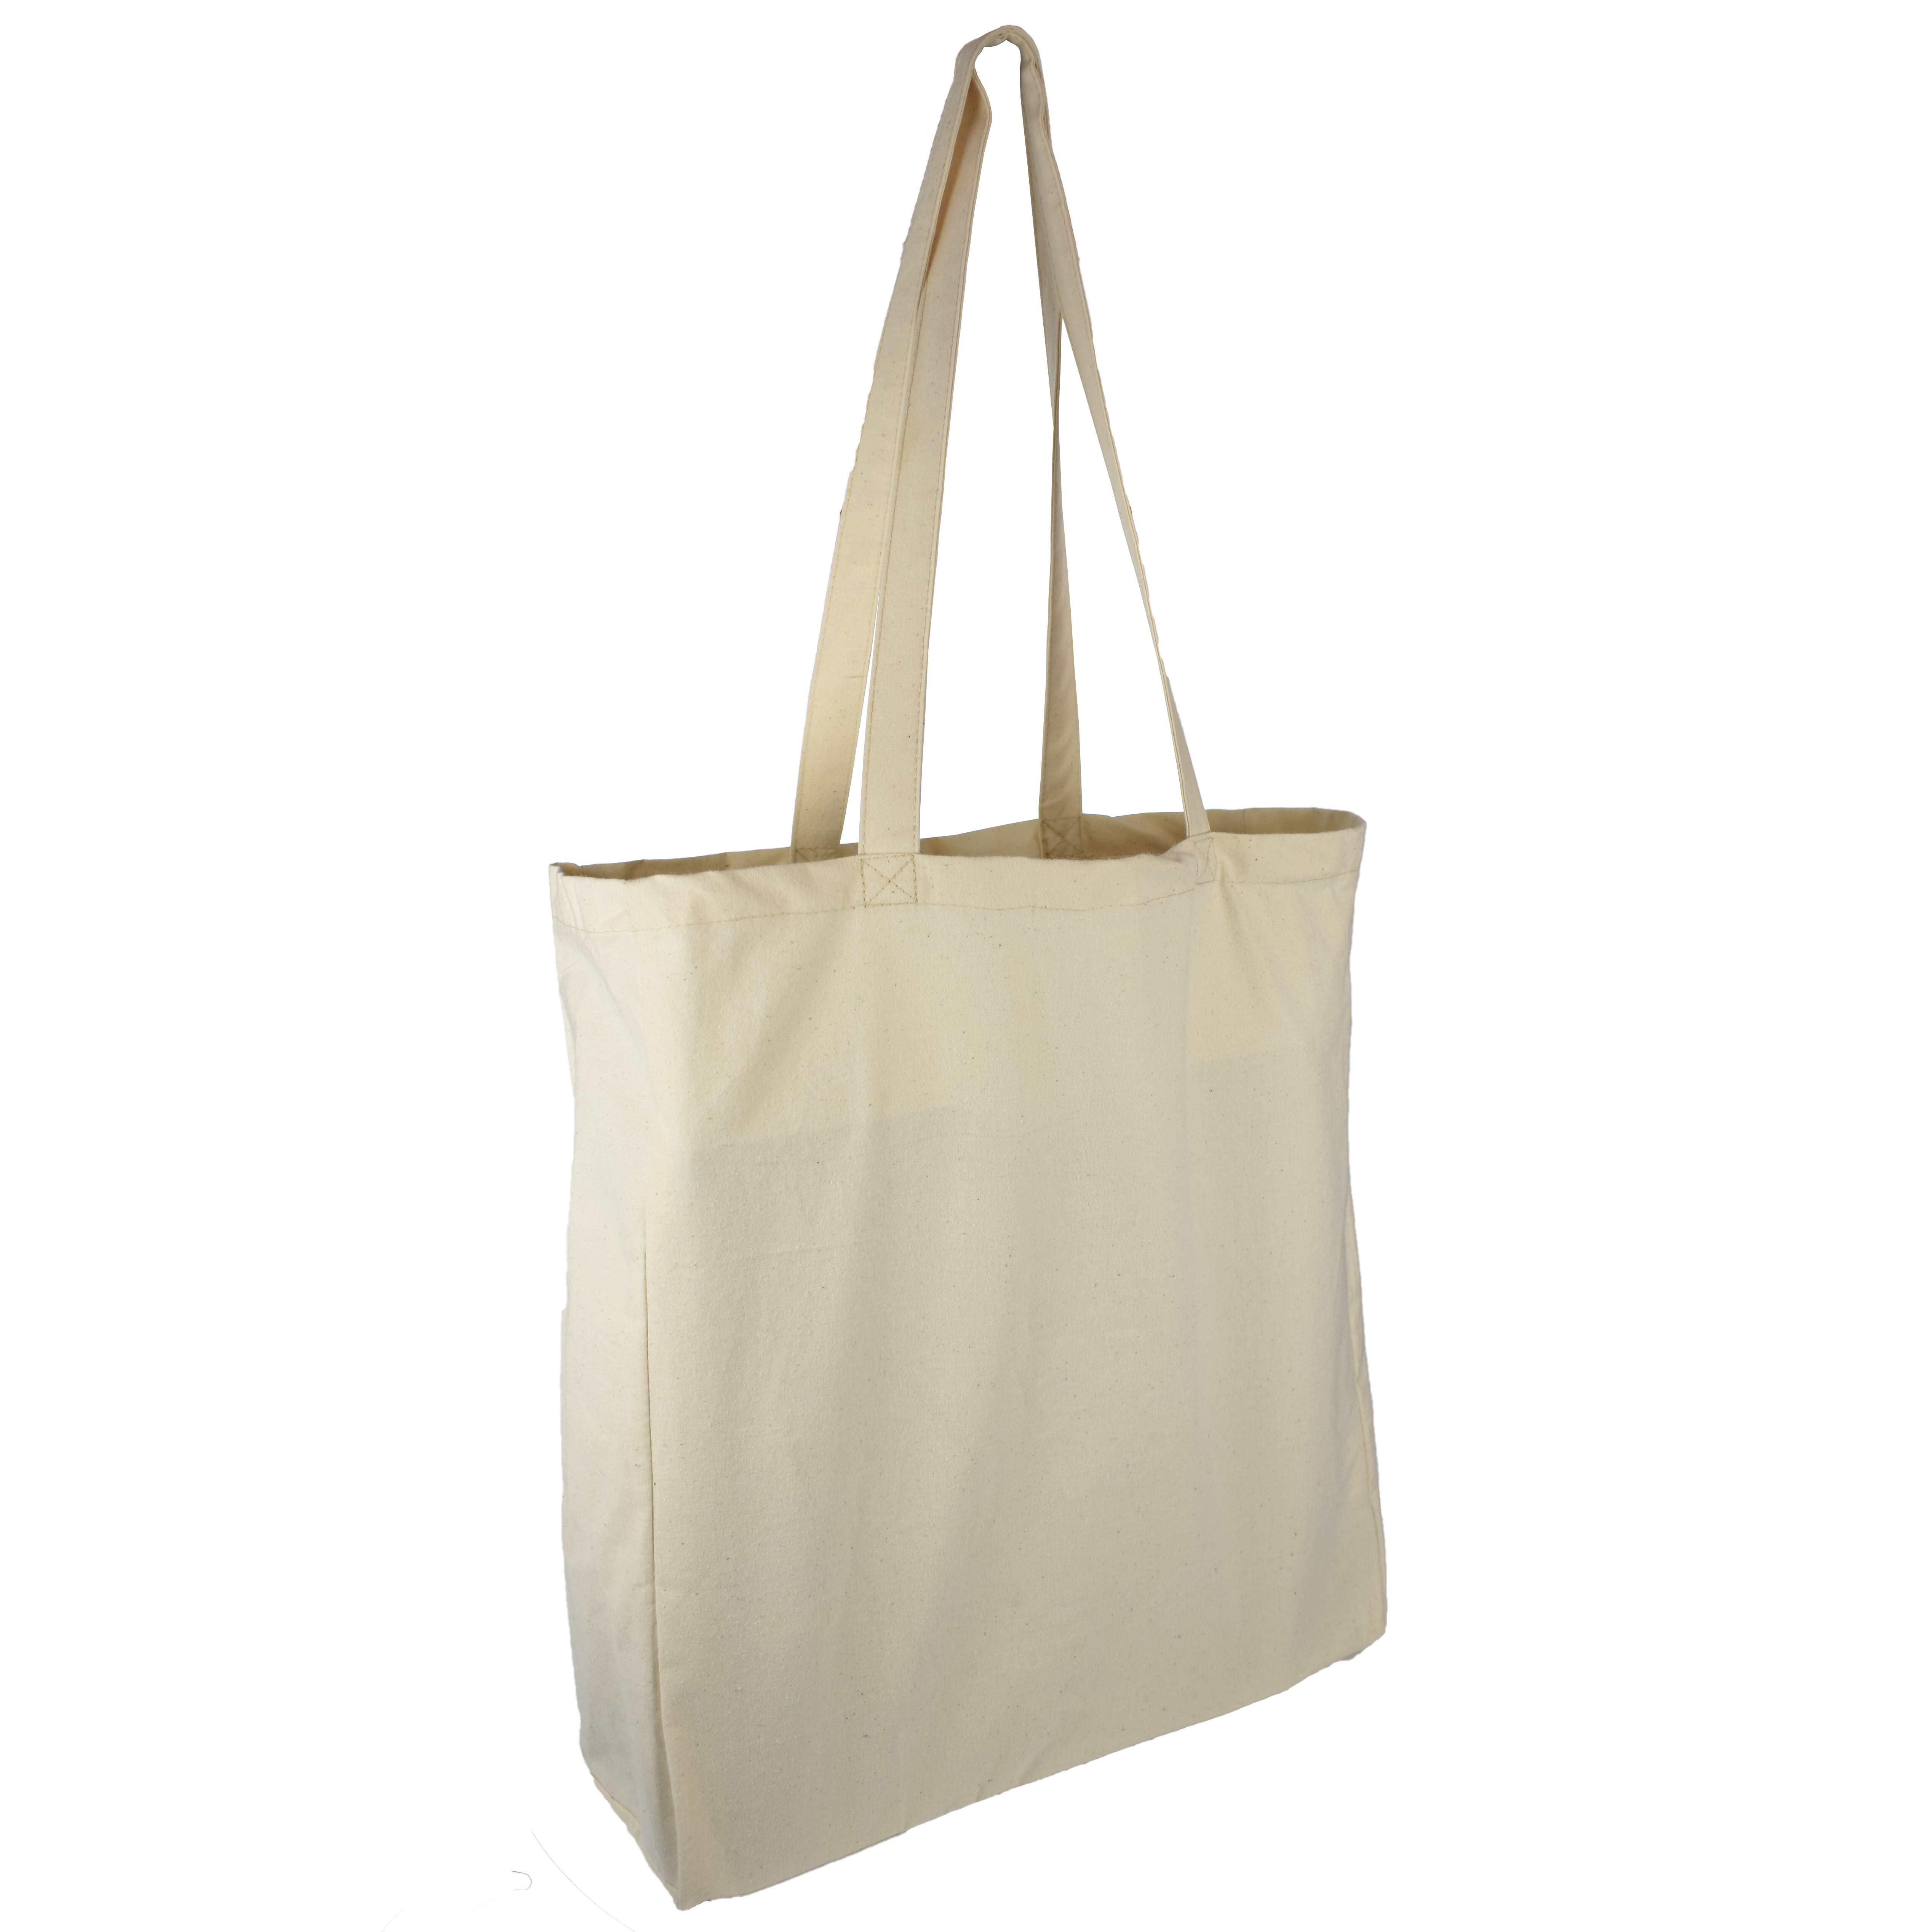 Cotton bags with long handles and pleats - Lunt